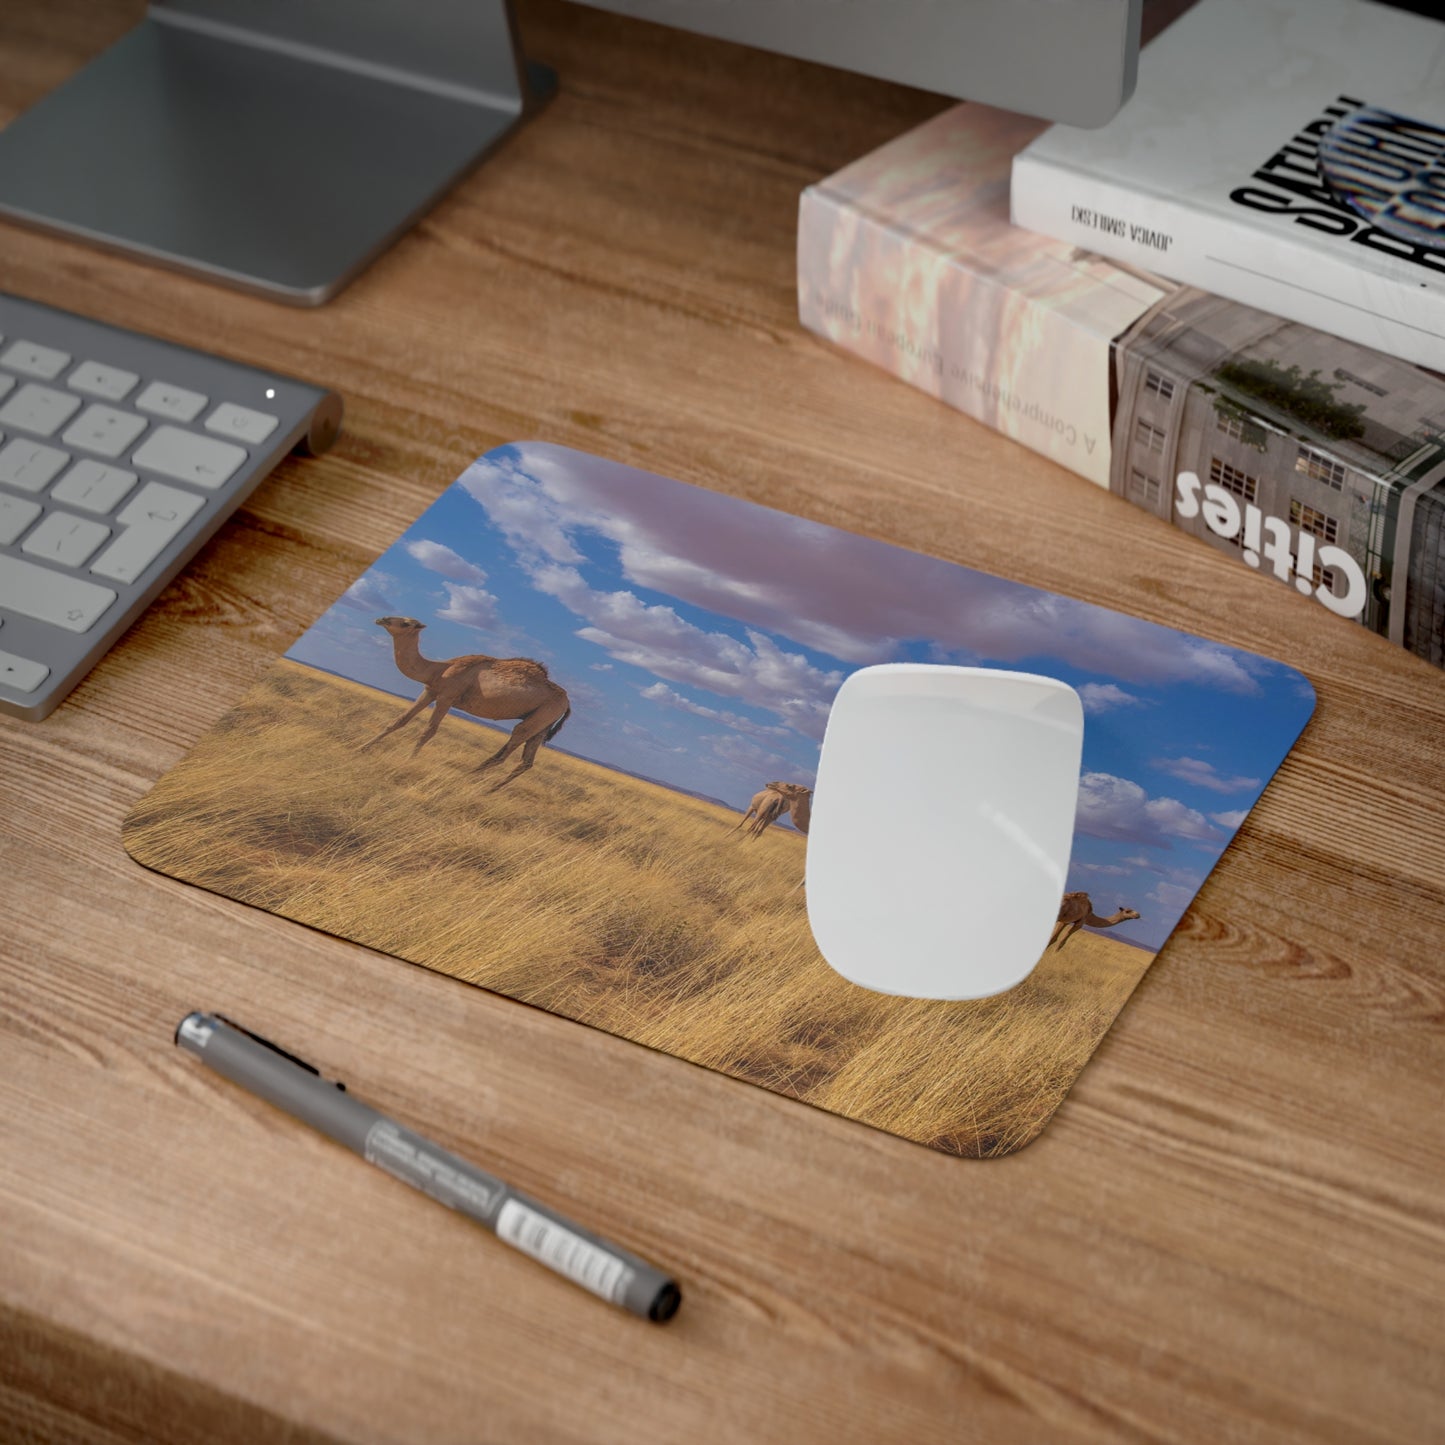 Desk Mouse Pad - Camels by Abdilaahi Persia